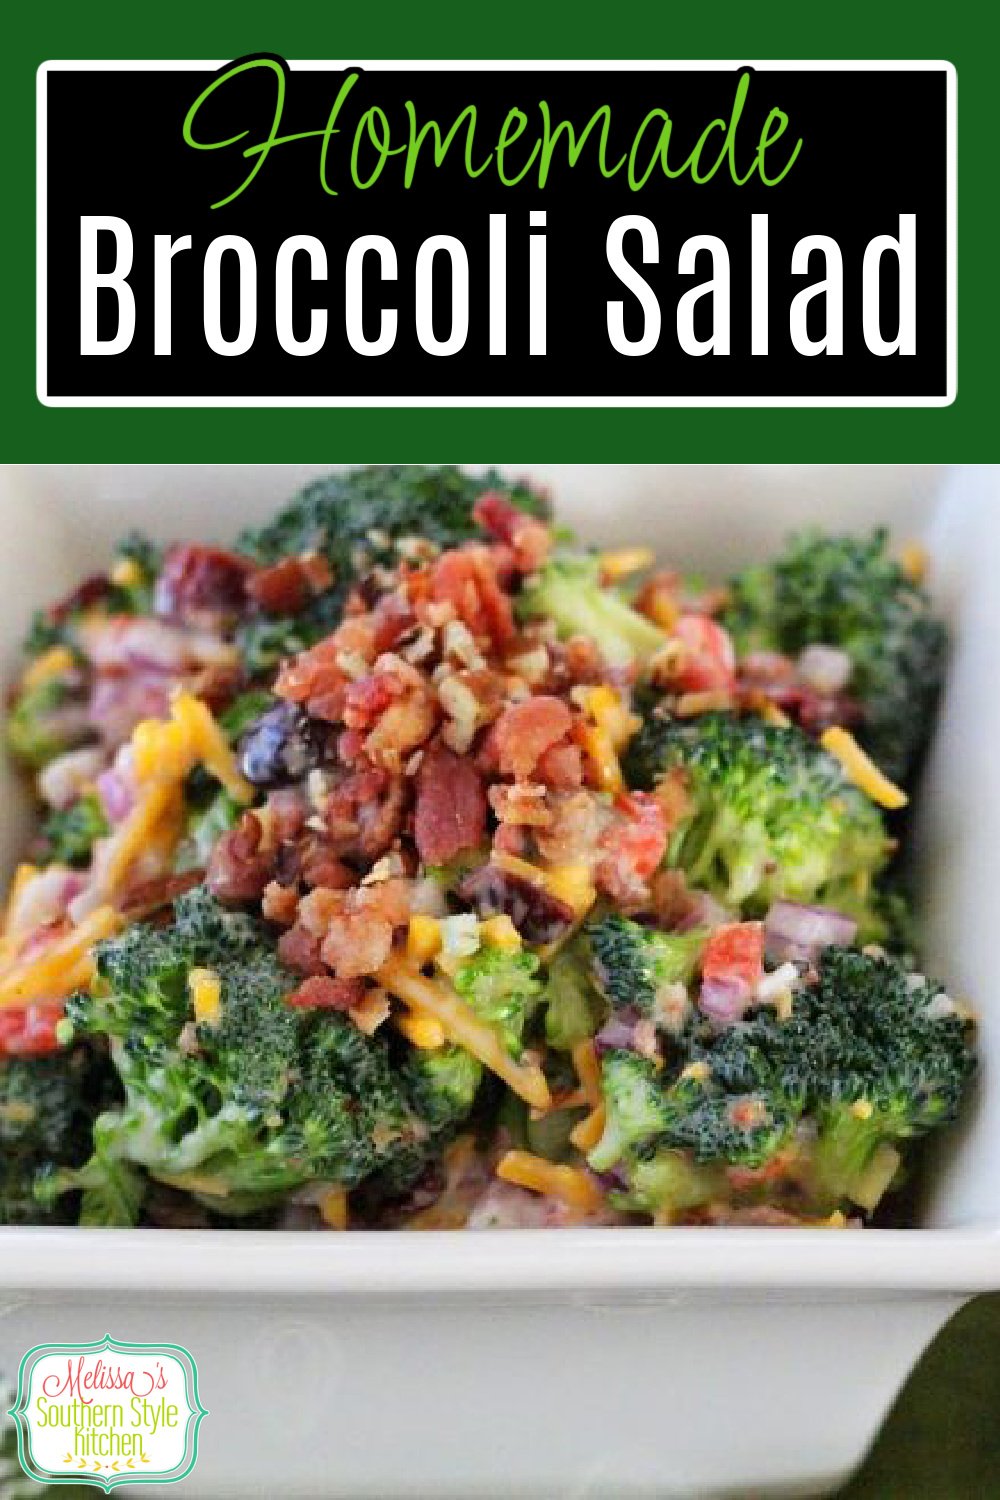 This Broccoli Salad recipe is filled with bacon, cheddar cheese and toasted pecans for the perfect side dish for any meal #broccolisalad #broccolirecipes #bacon #salads #picnicfood #saladrecipes #broccolirecipes #sidedishrecies #dinnerideas #southernfood #southernrecipes